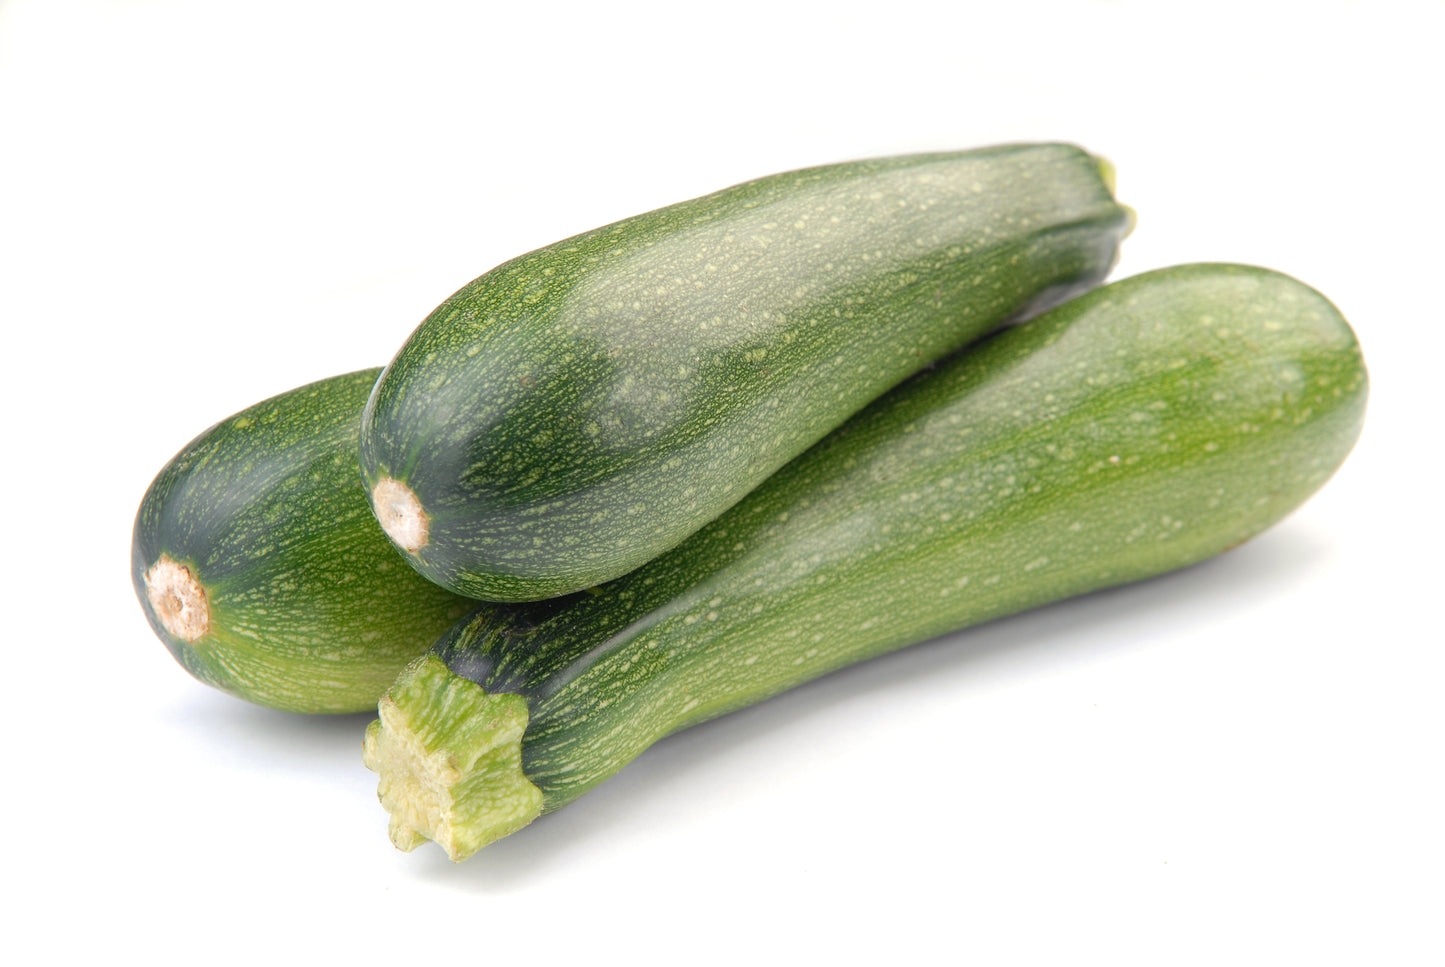 Courgette Clarion F1 Hybrid Seeds